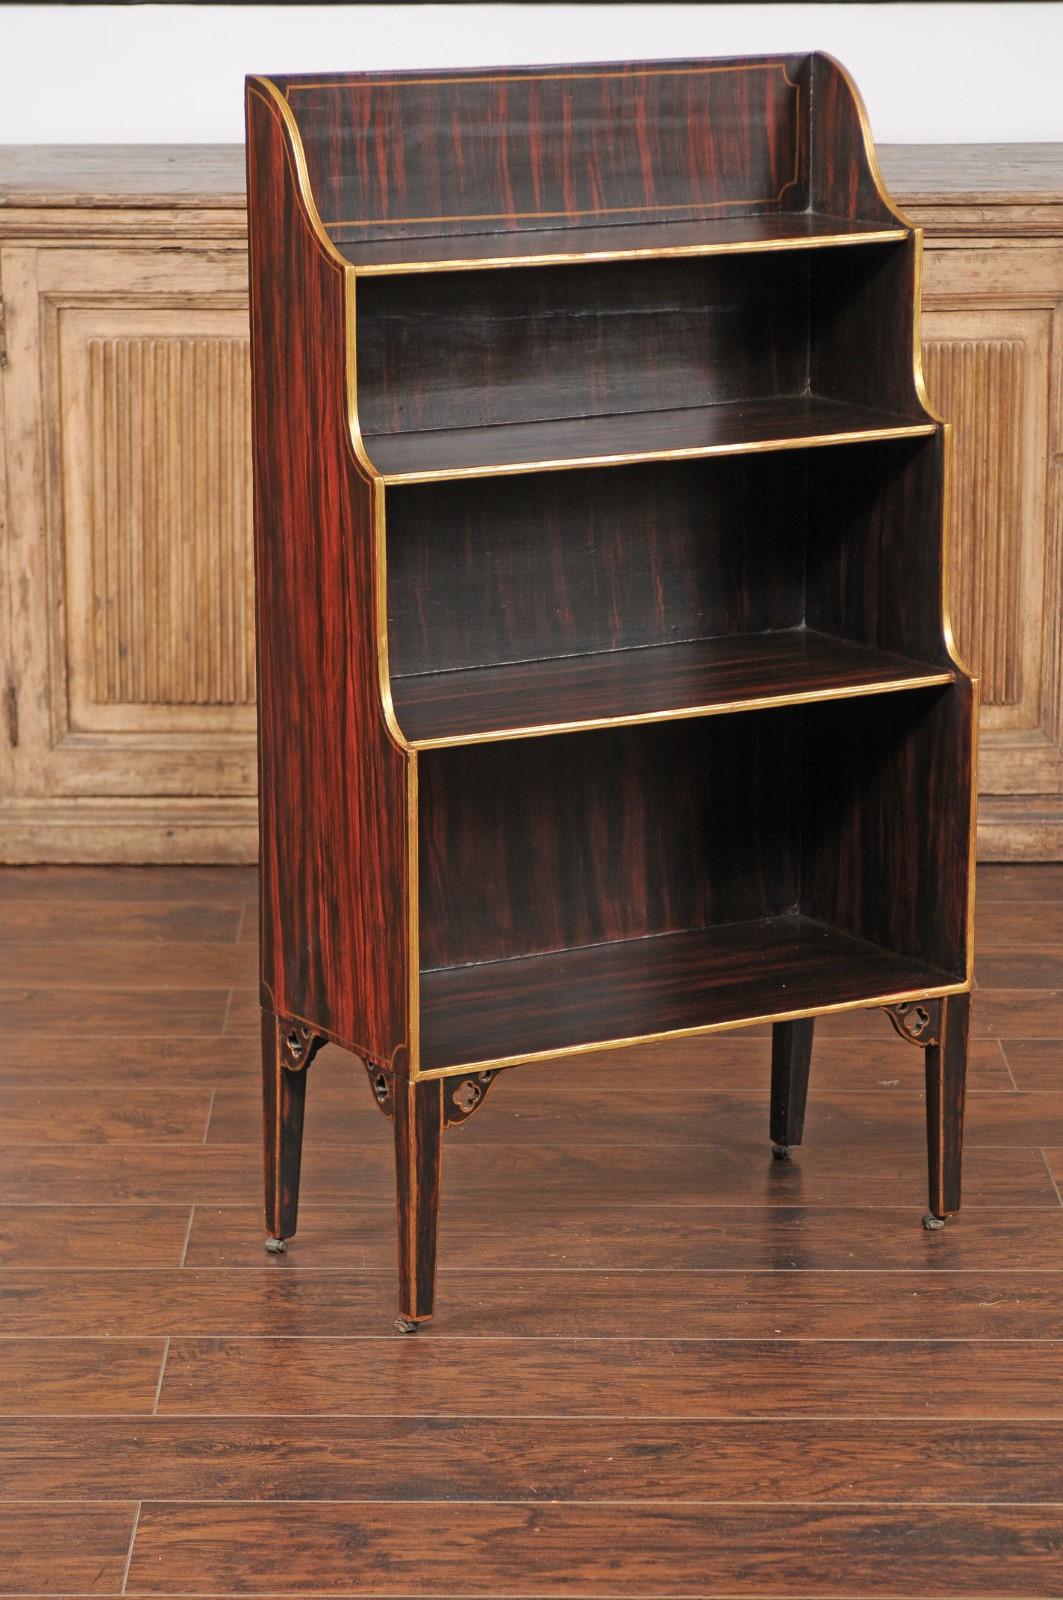 An English faux-painted waterfall bookcase from the mid-19th century, with gilded accents and tapered legs. Born in England during the 1850s, this waterfall bookcase features four open shelves of increasing size presenting a faux finish. The entire